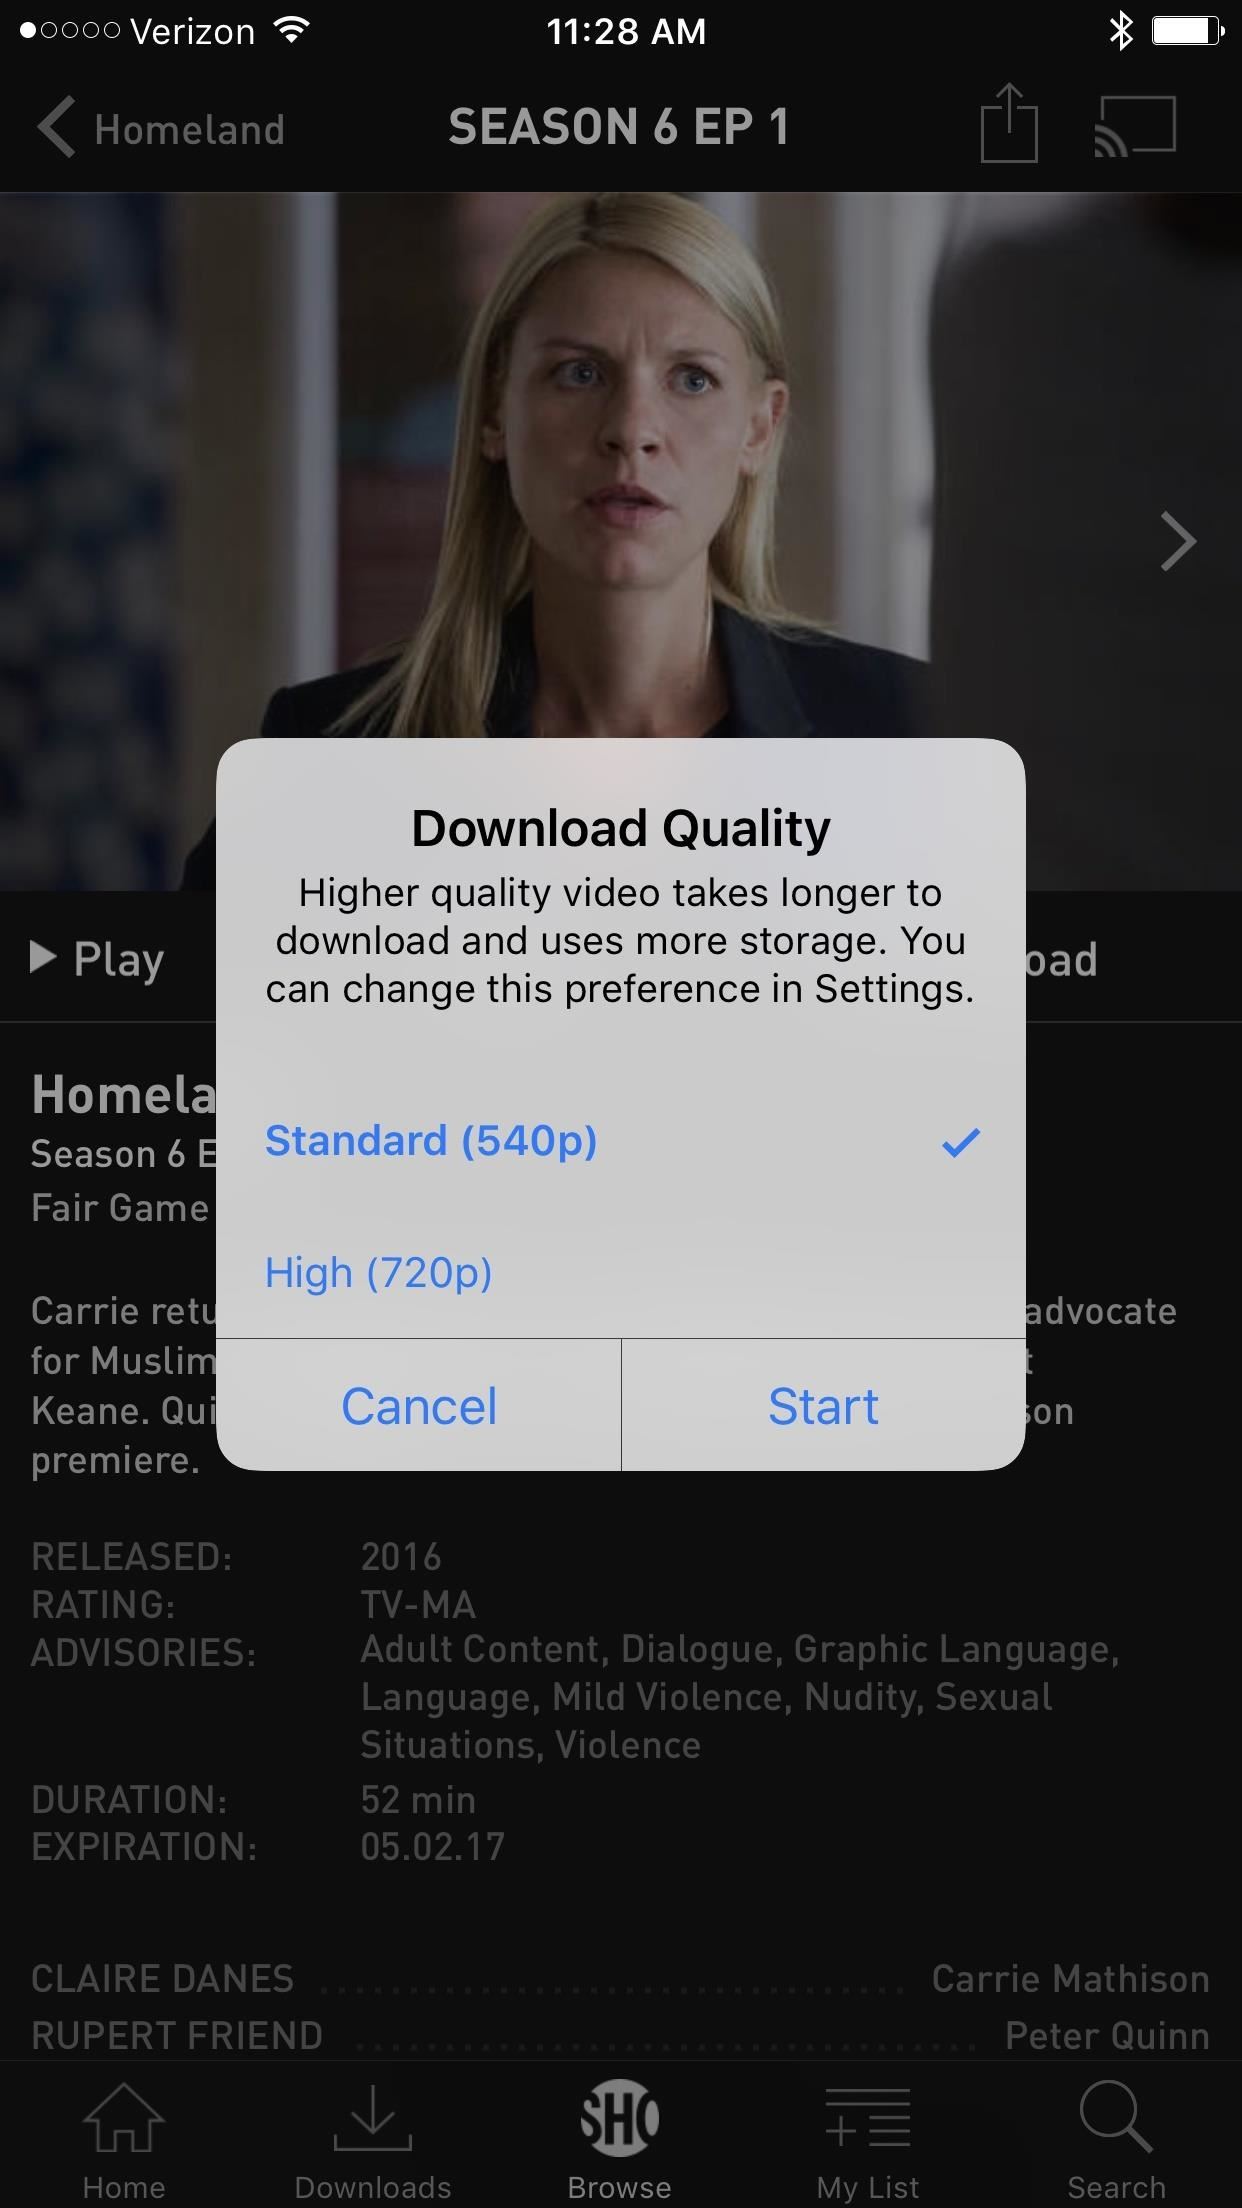 Showtime Will Now Let You Download TV Shows & Movies for Offline Viewing